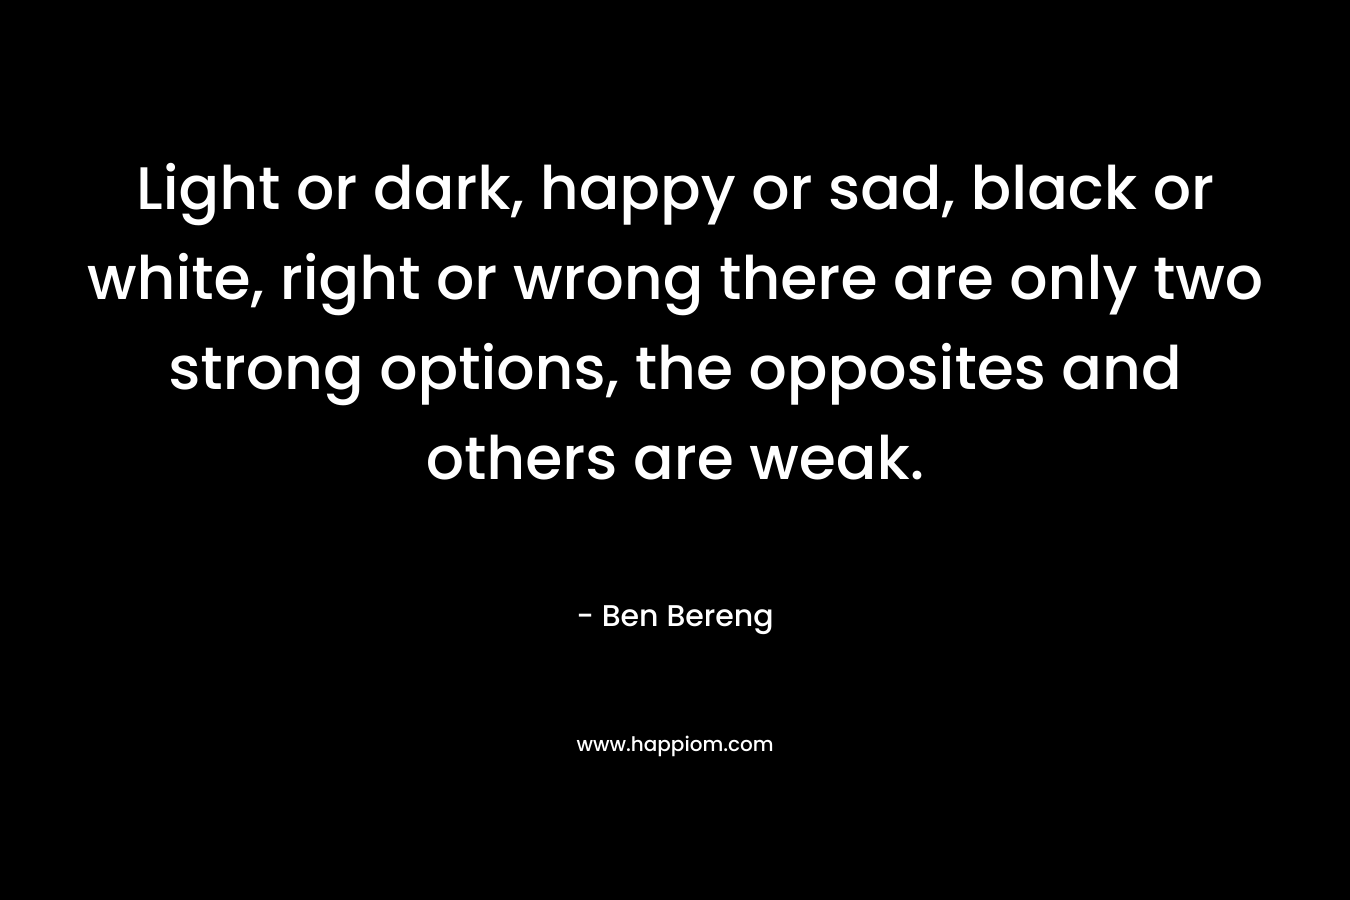 Light or dark, happy or sad, black or white, right or wrong there are only two strong options, the opposites and others are weak. – Ben Bereng